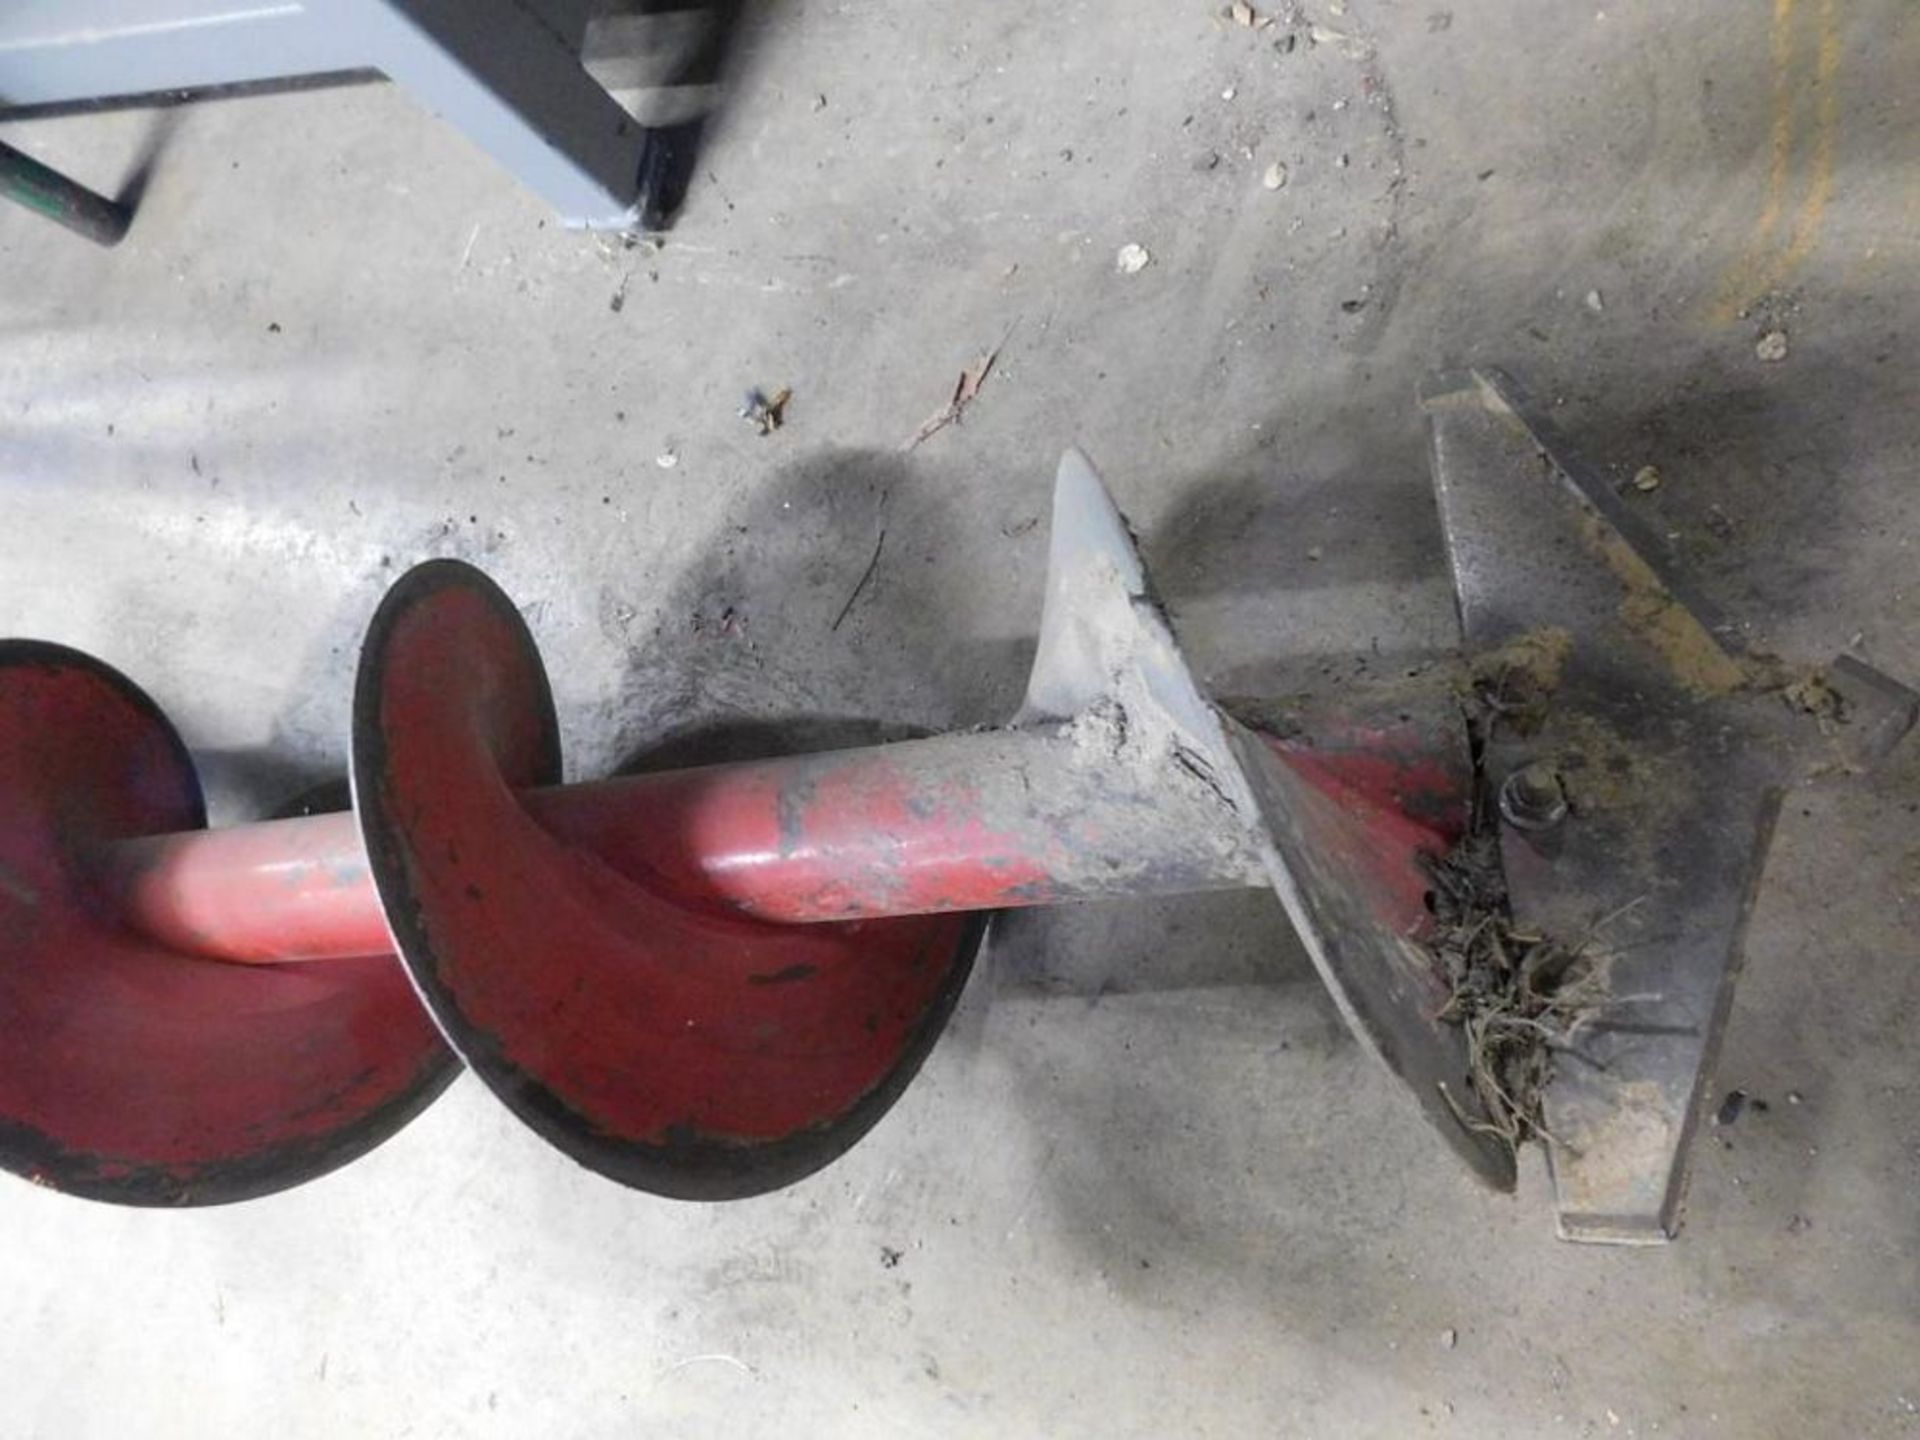 12" x 42" Post Hole Auger Bit (LOCATION: 318 N. Milwaukee Ave., Wheeling, IL 60090) - Image 2 of 2